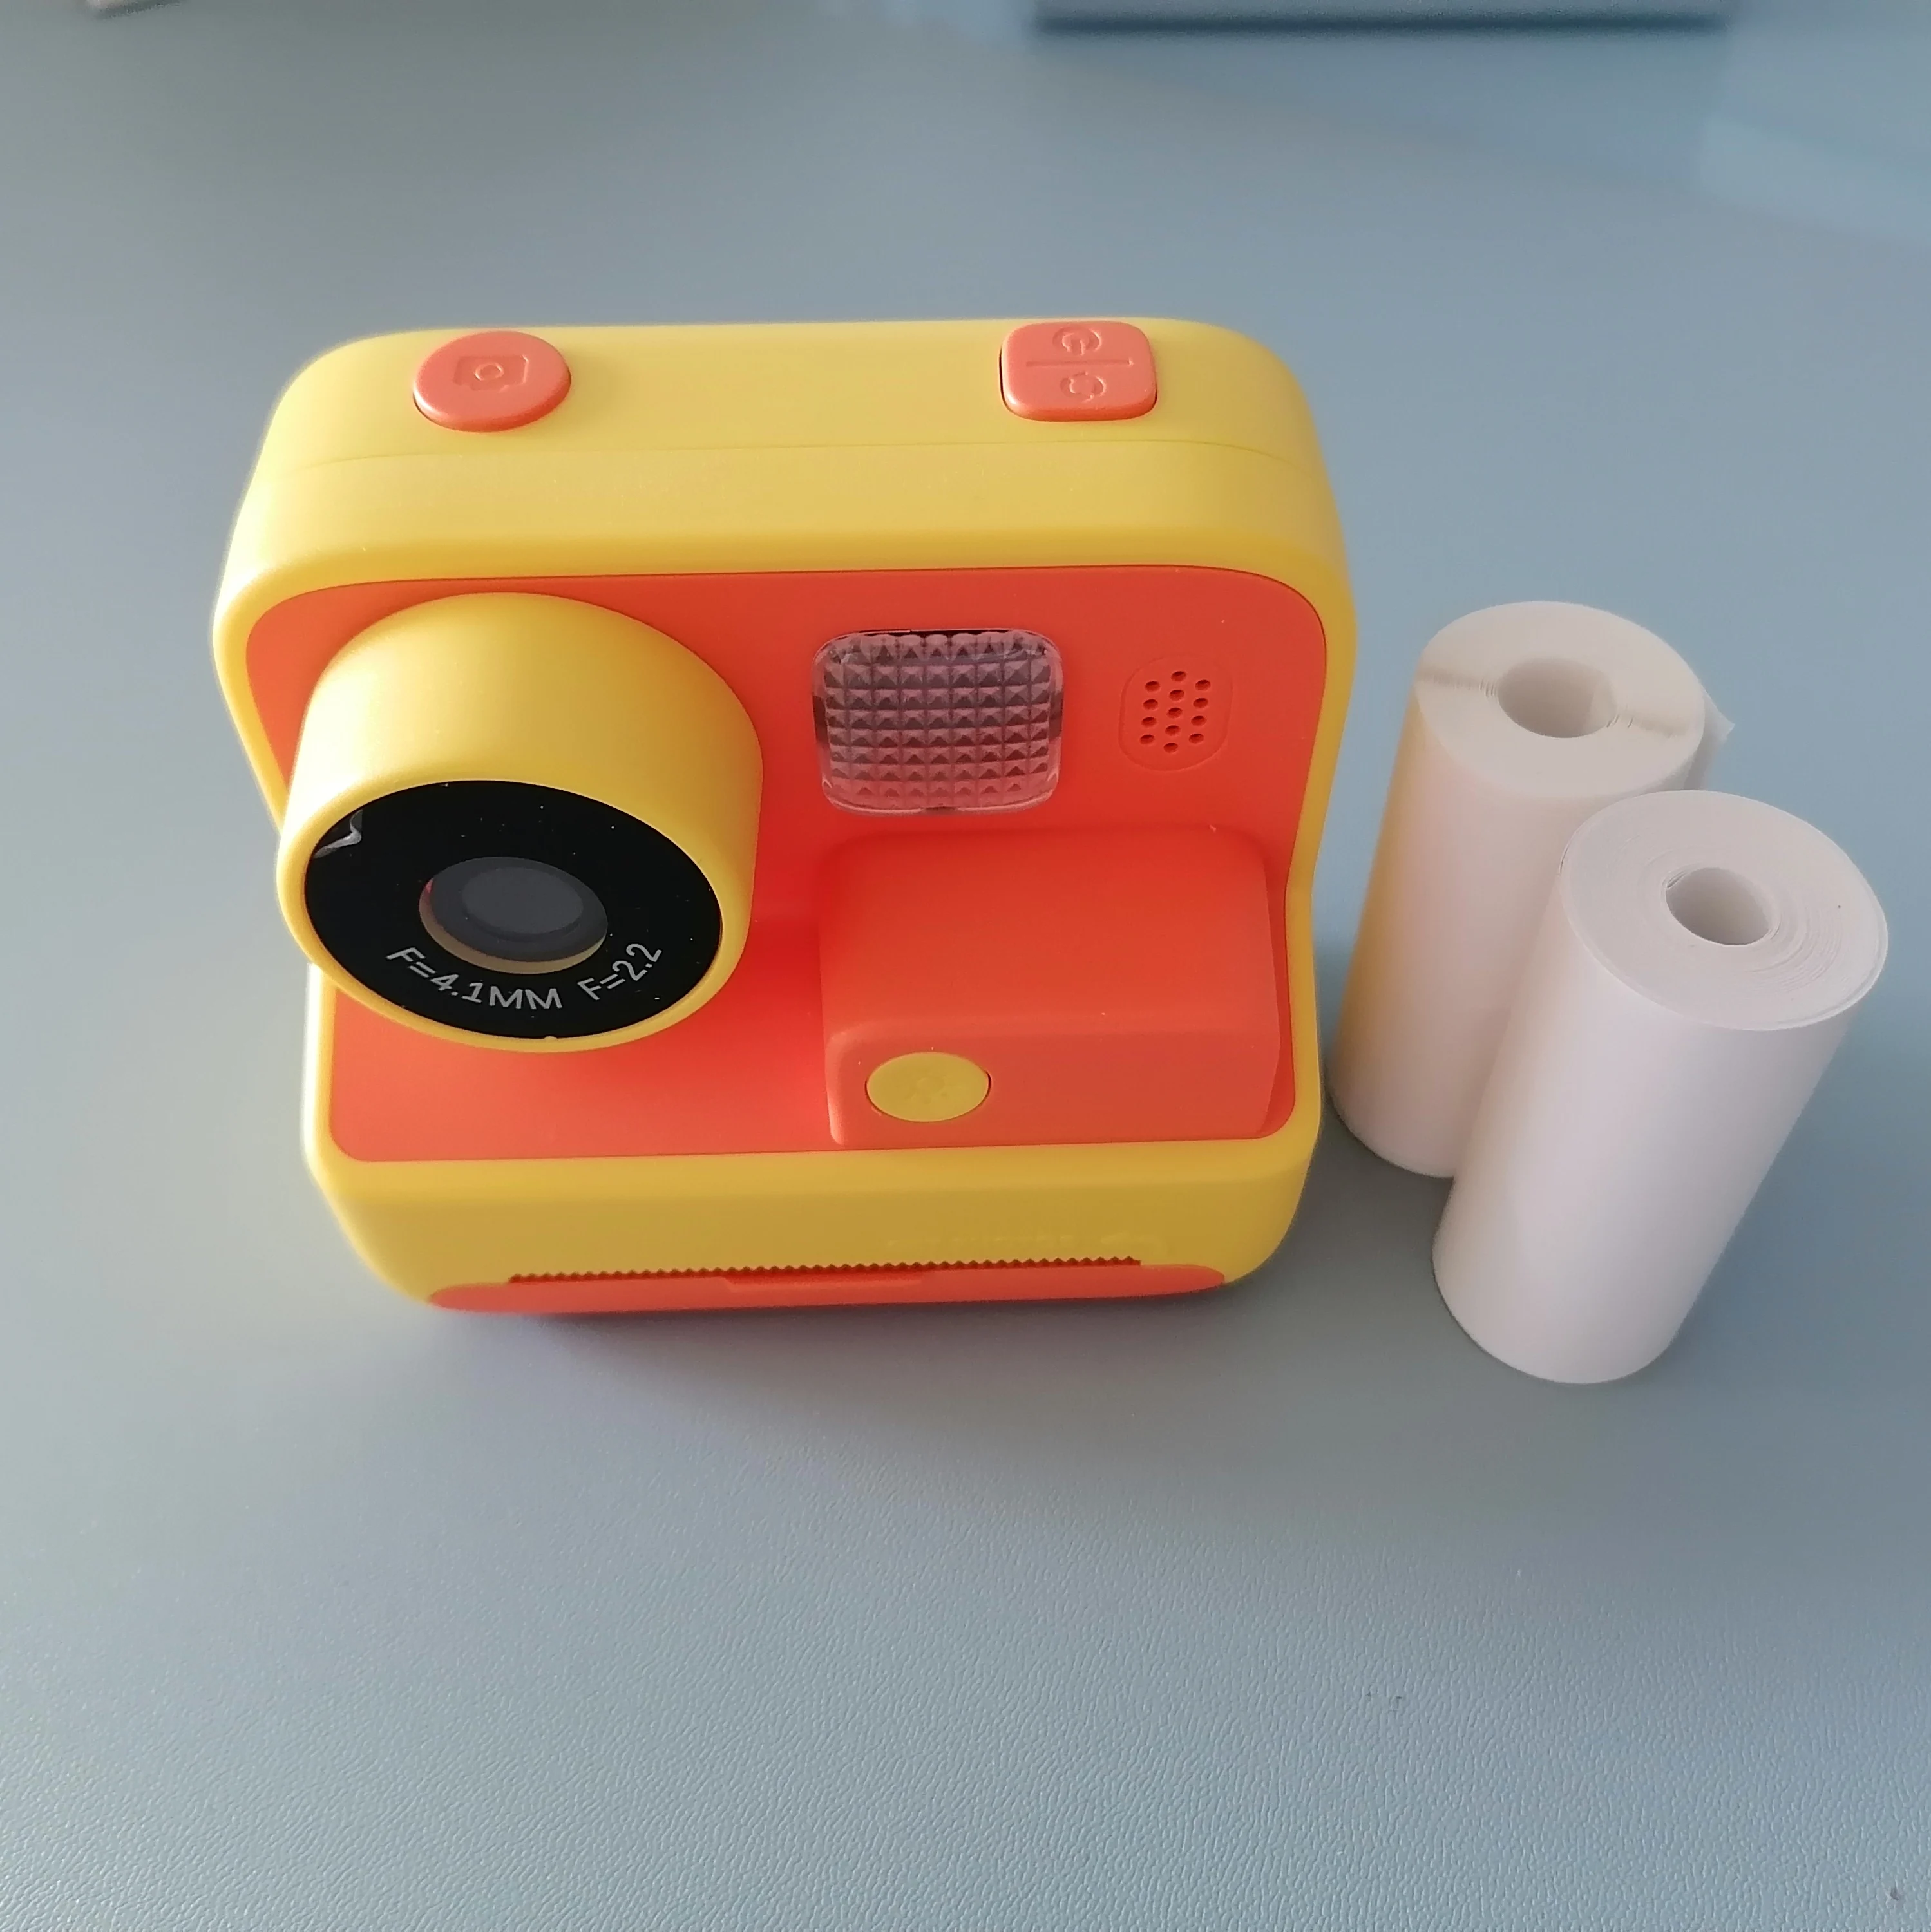 S01400f14b81f4ea28387a810ec1c146au Instant Print Kids Camera 2.0" 1080P Video Photo with Thermal Print Paper